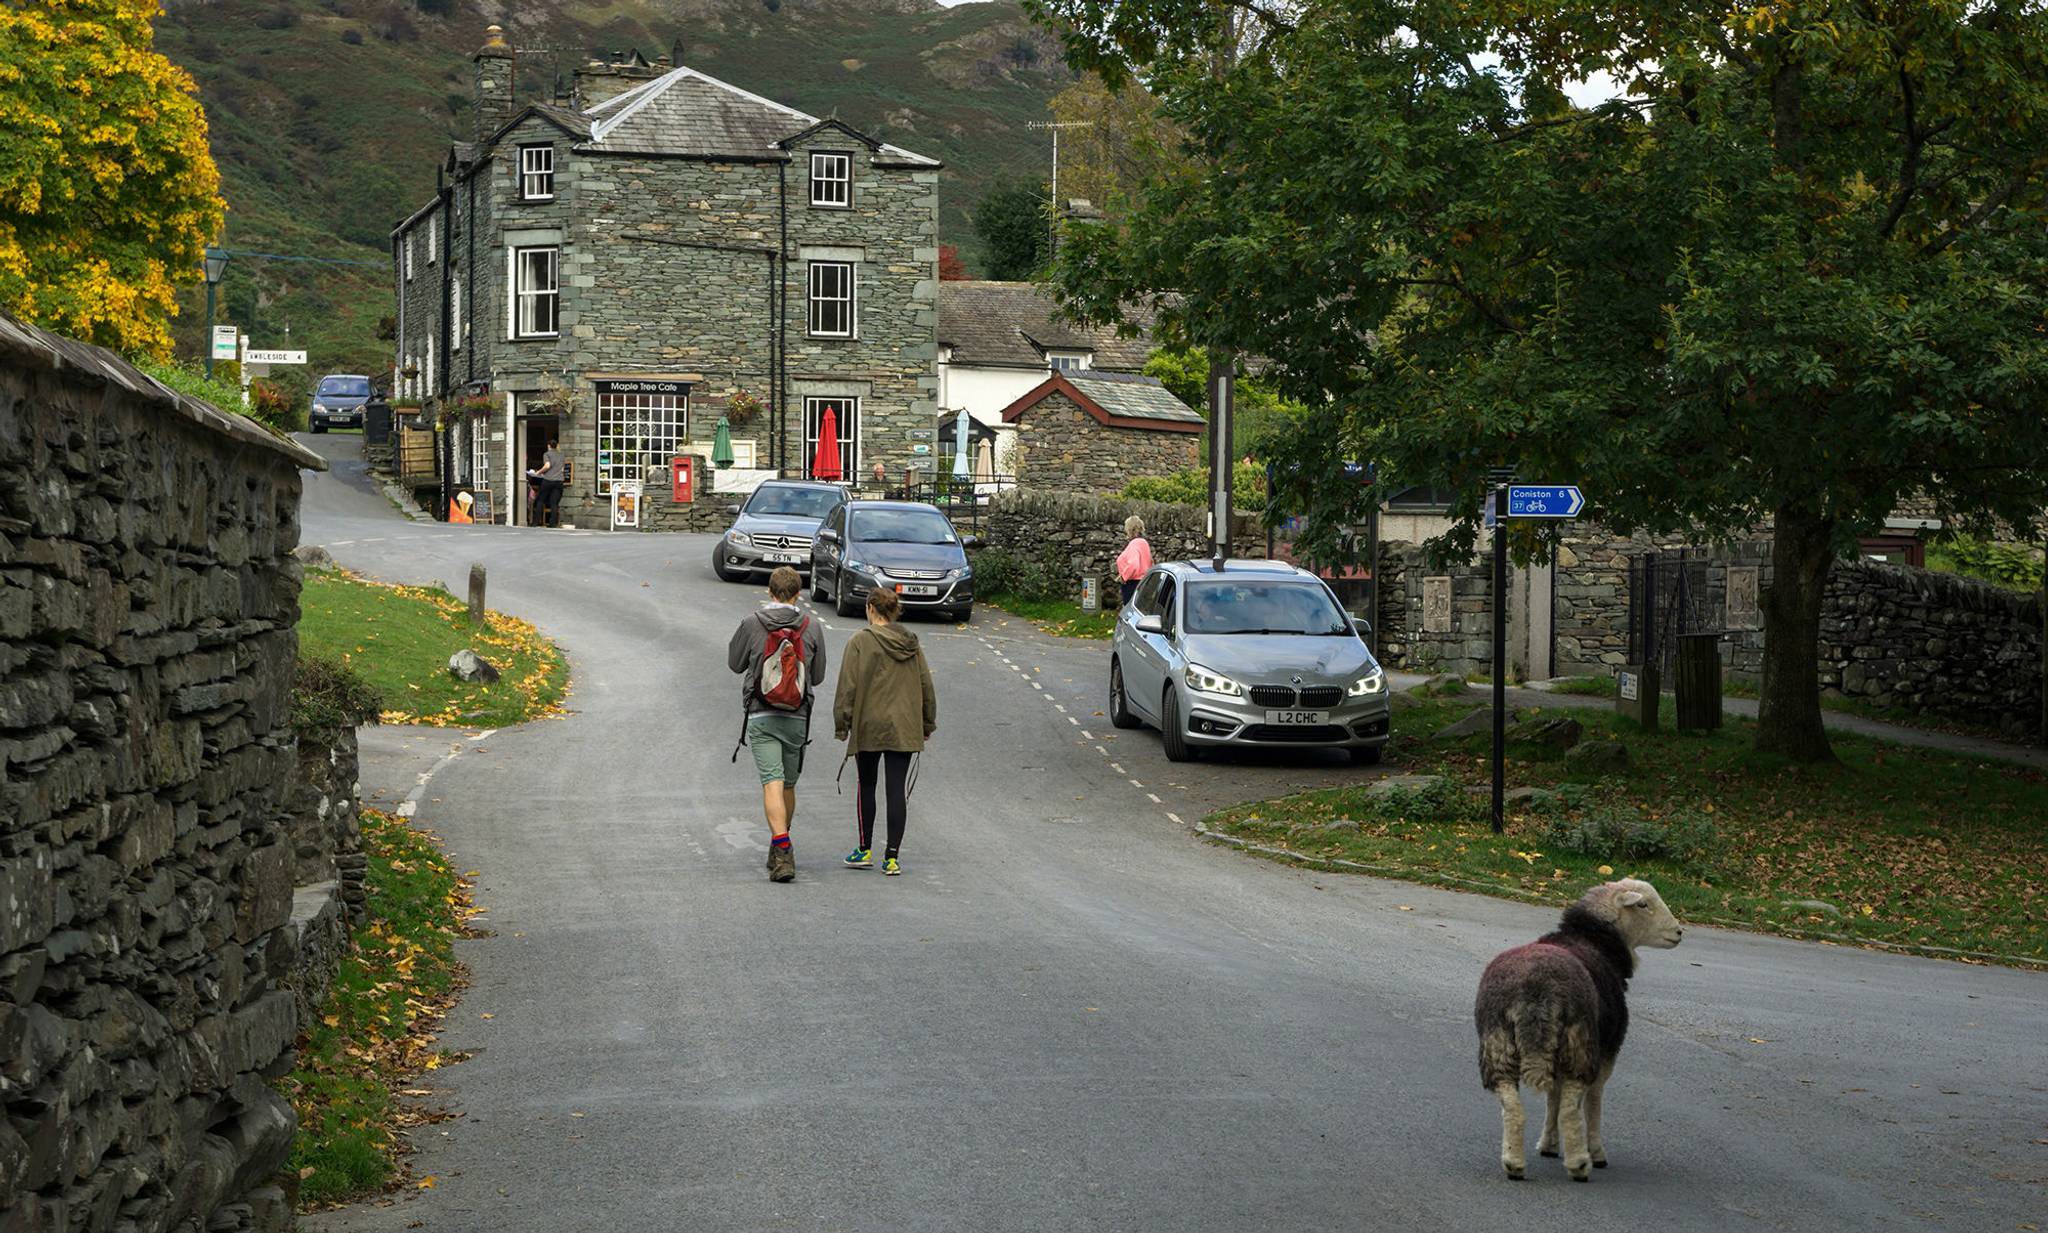 Tourism is boosting wealth in the UK countryside